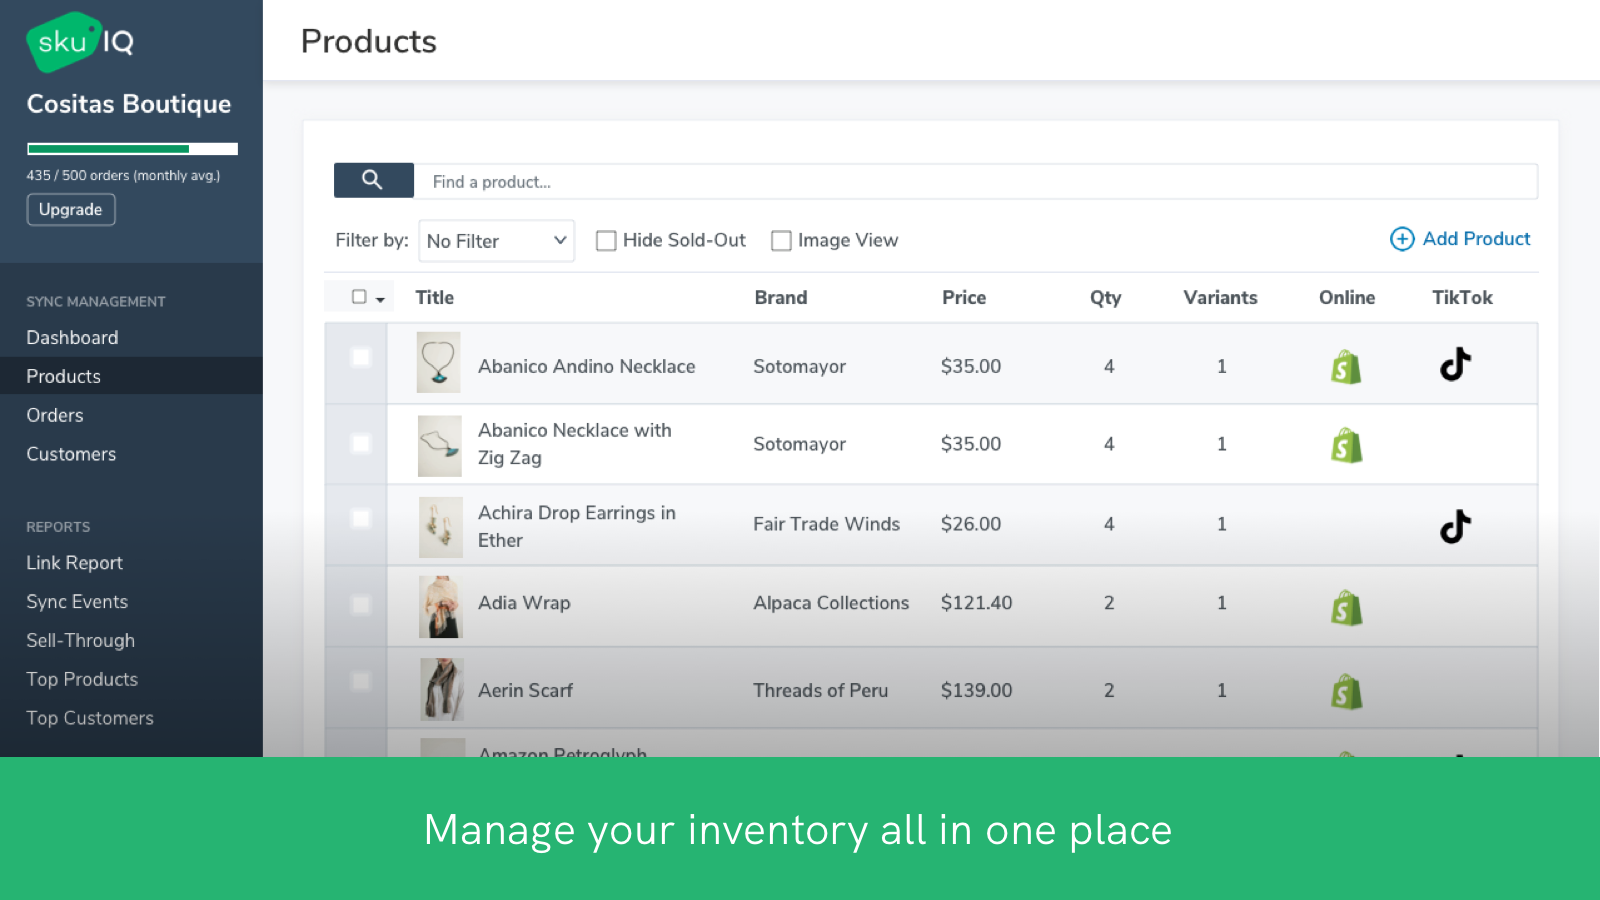 Screen view of SKU IQ Products page